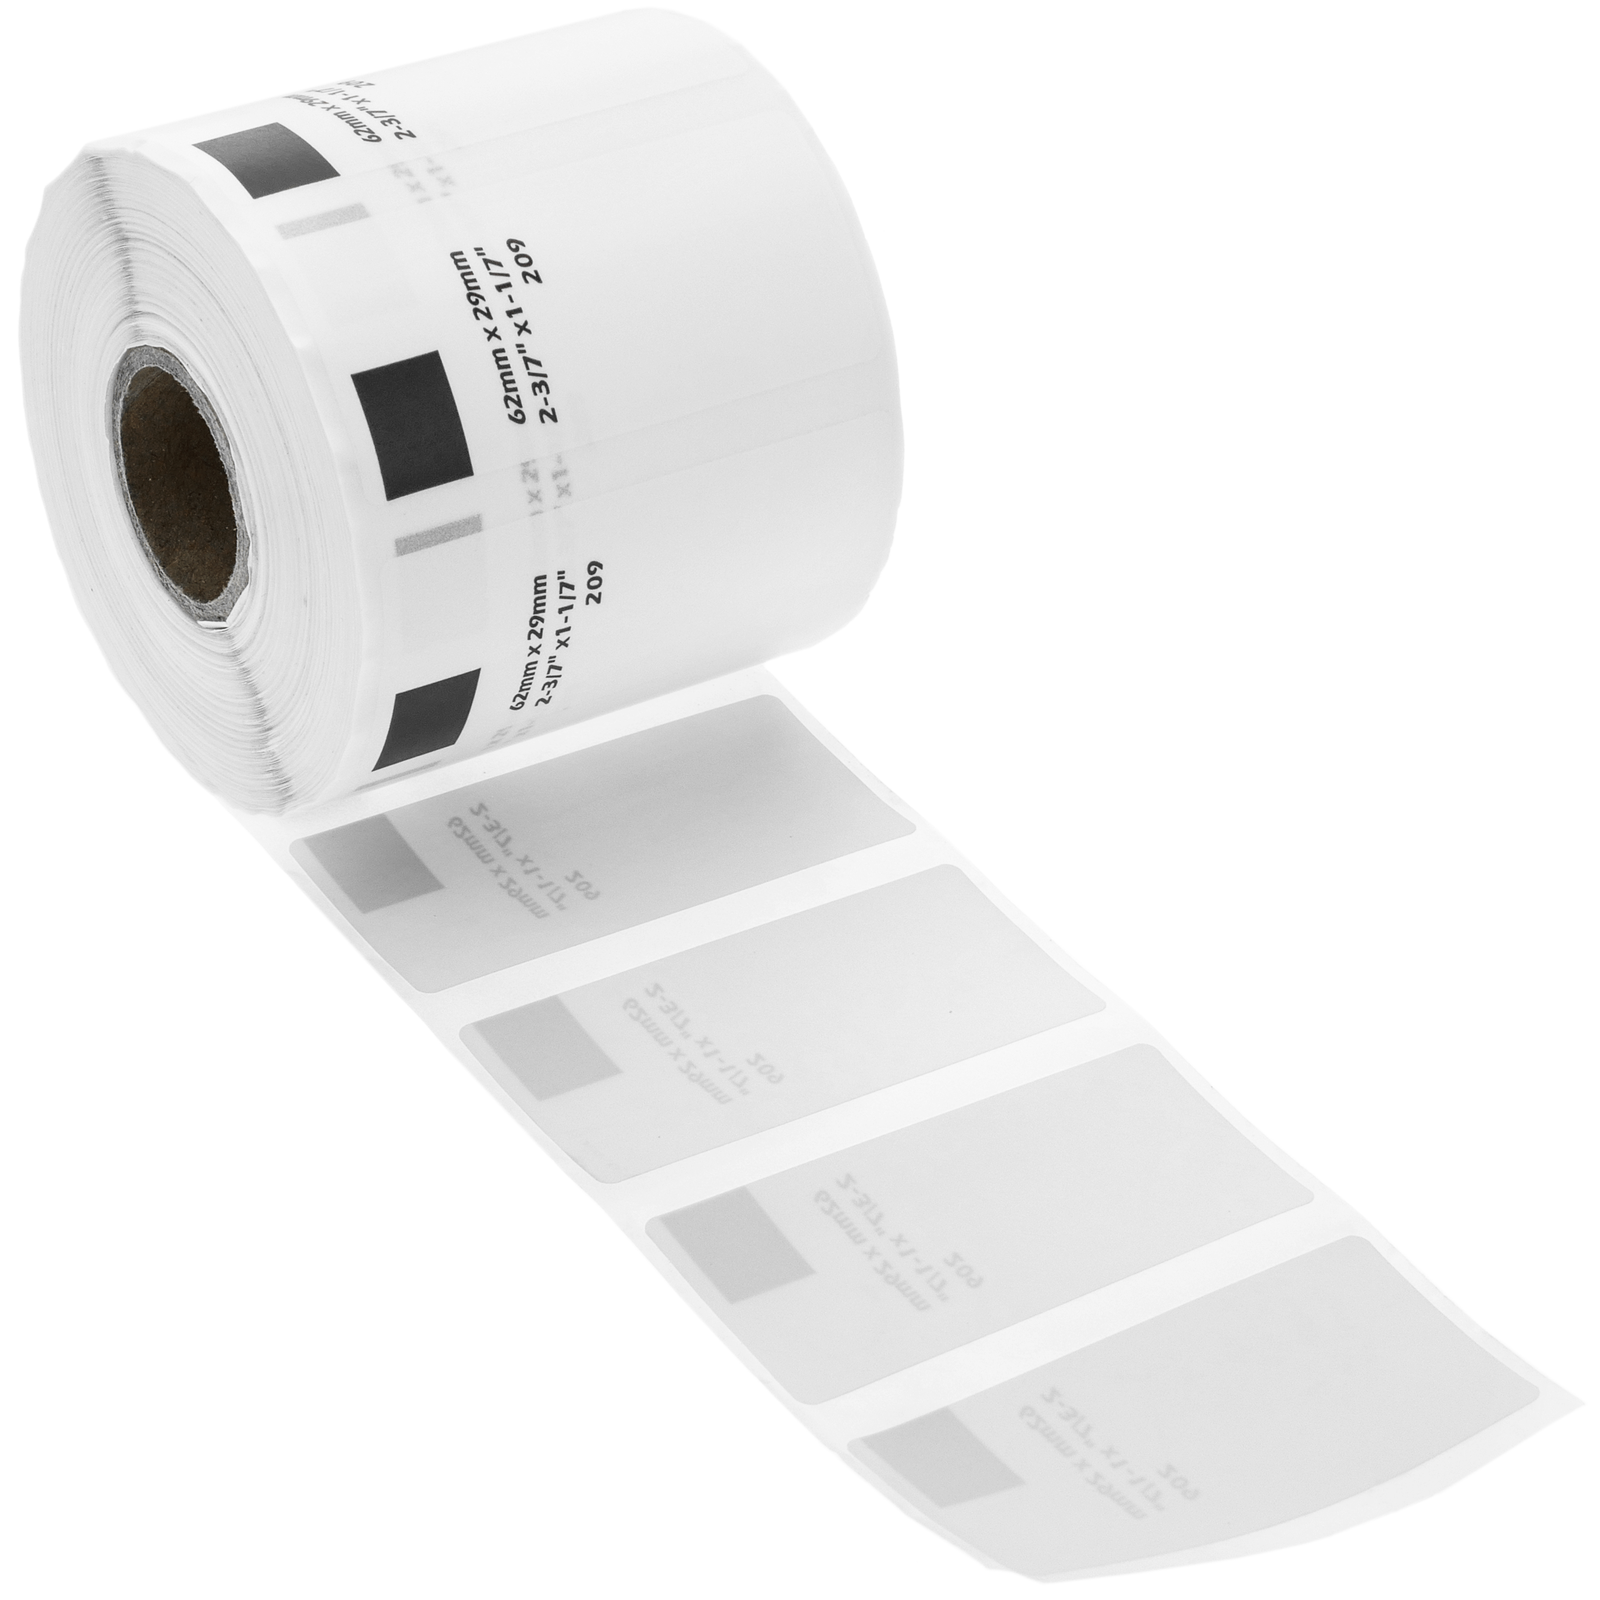 50 x Labels for Brother DK 11209 29 x 62mm /800 QL 500 570 1050 700 White